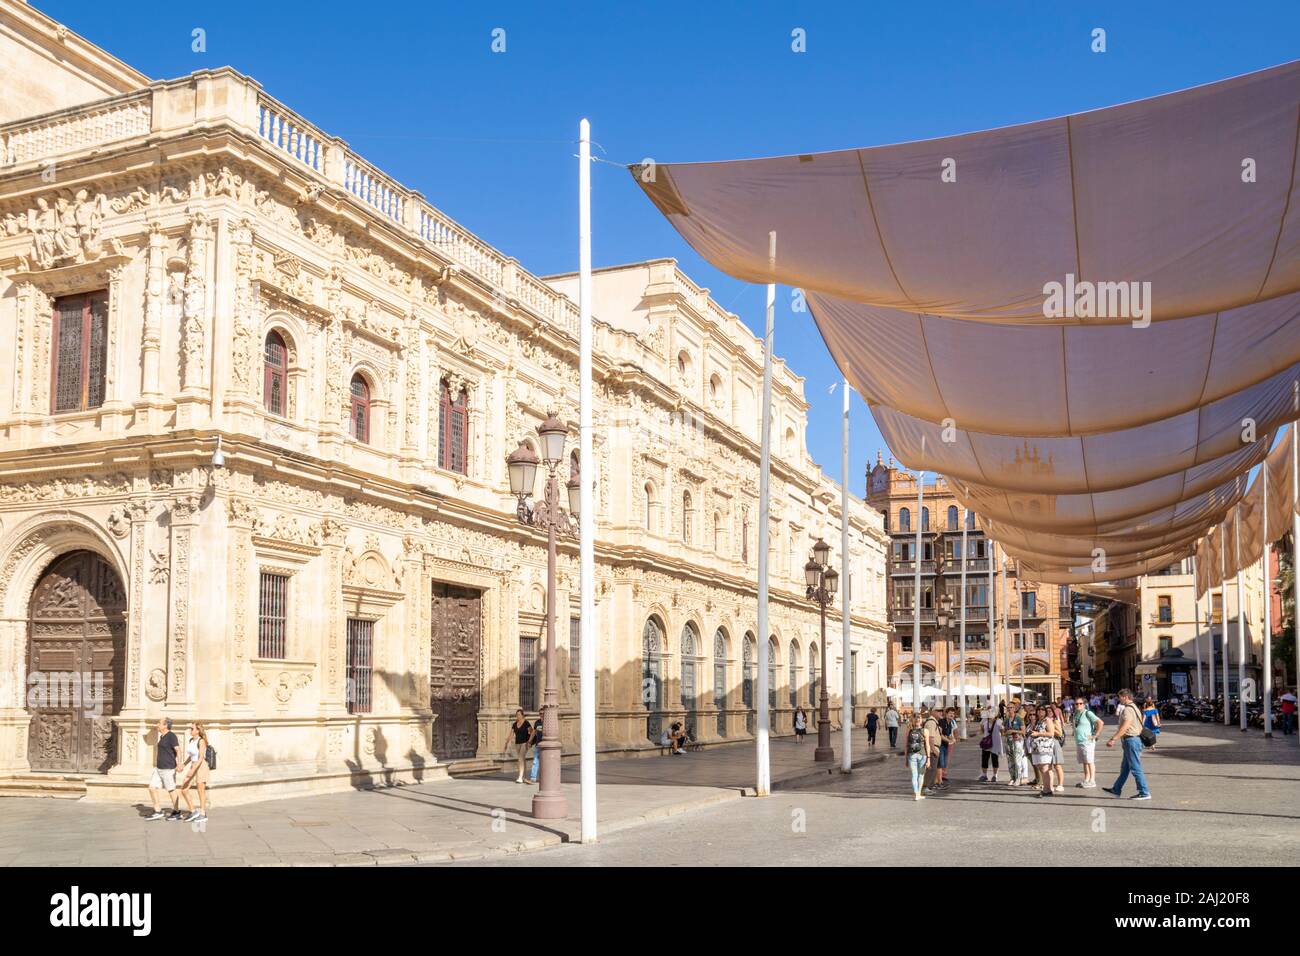 Seville Town Hall with sun shades canopy, Plaza de San Francisco, Seville, Spain, Andalusia, Spain, Europe Stock Photo